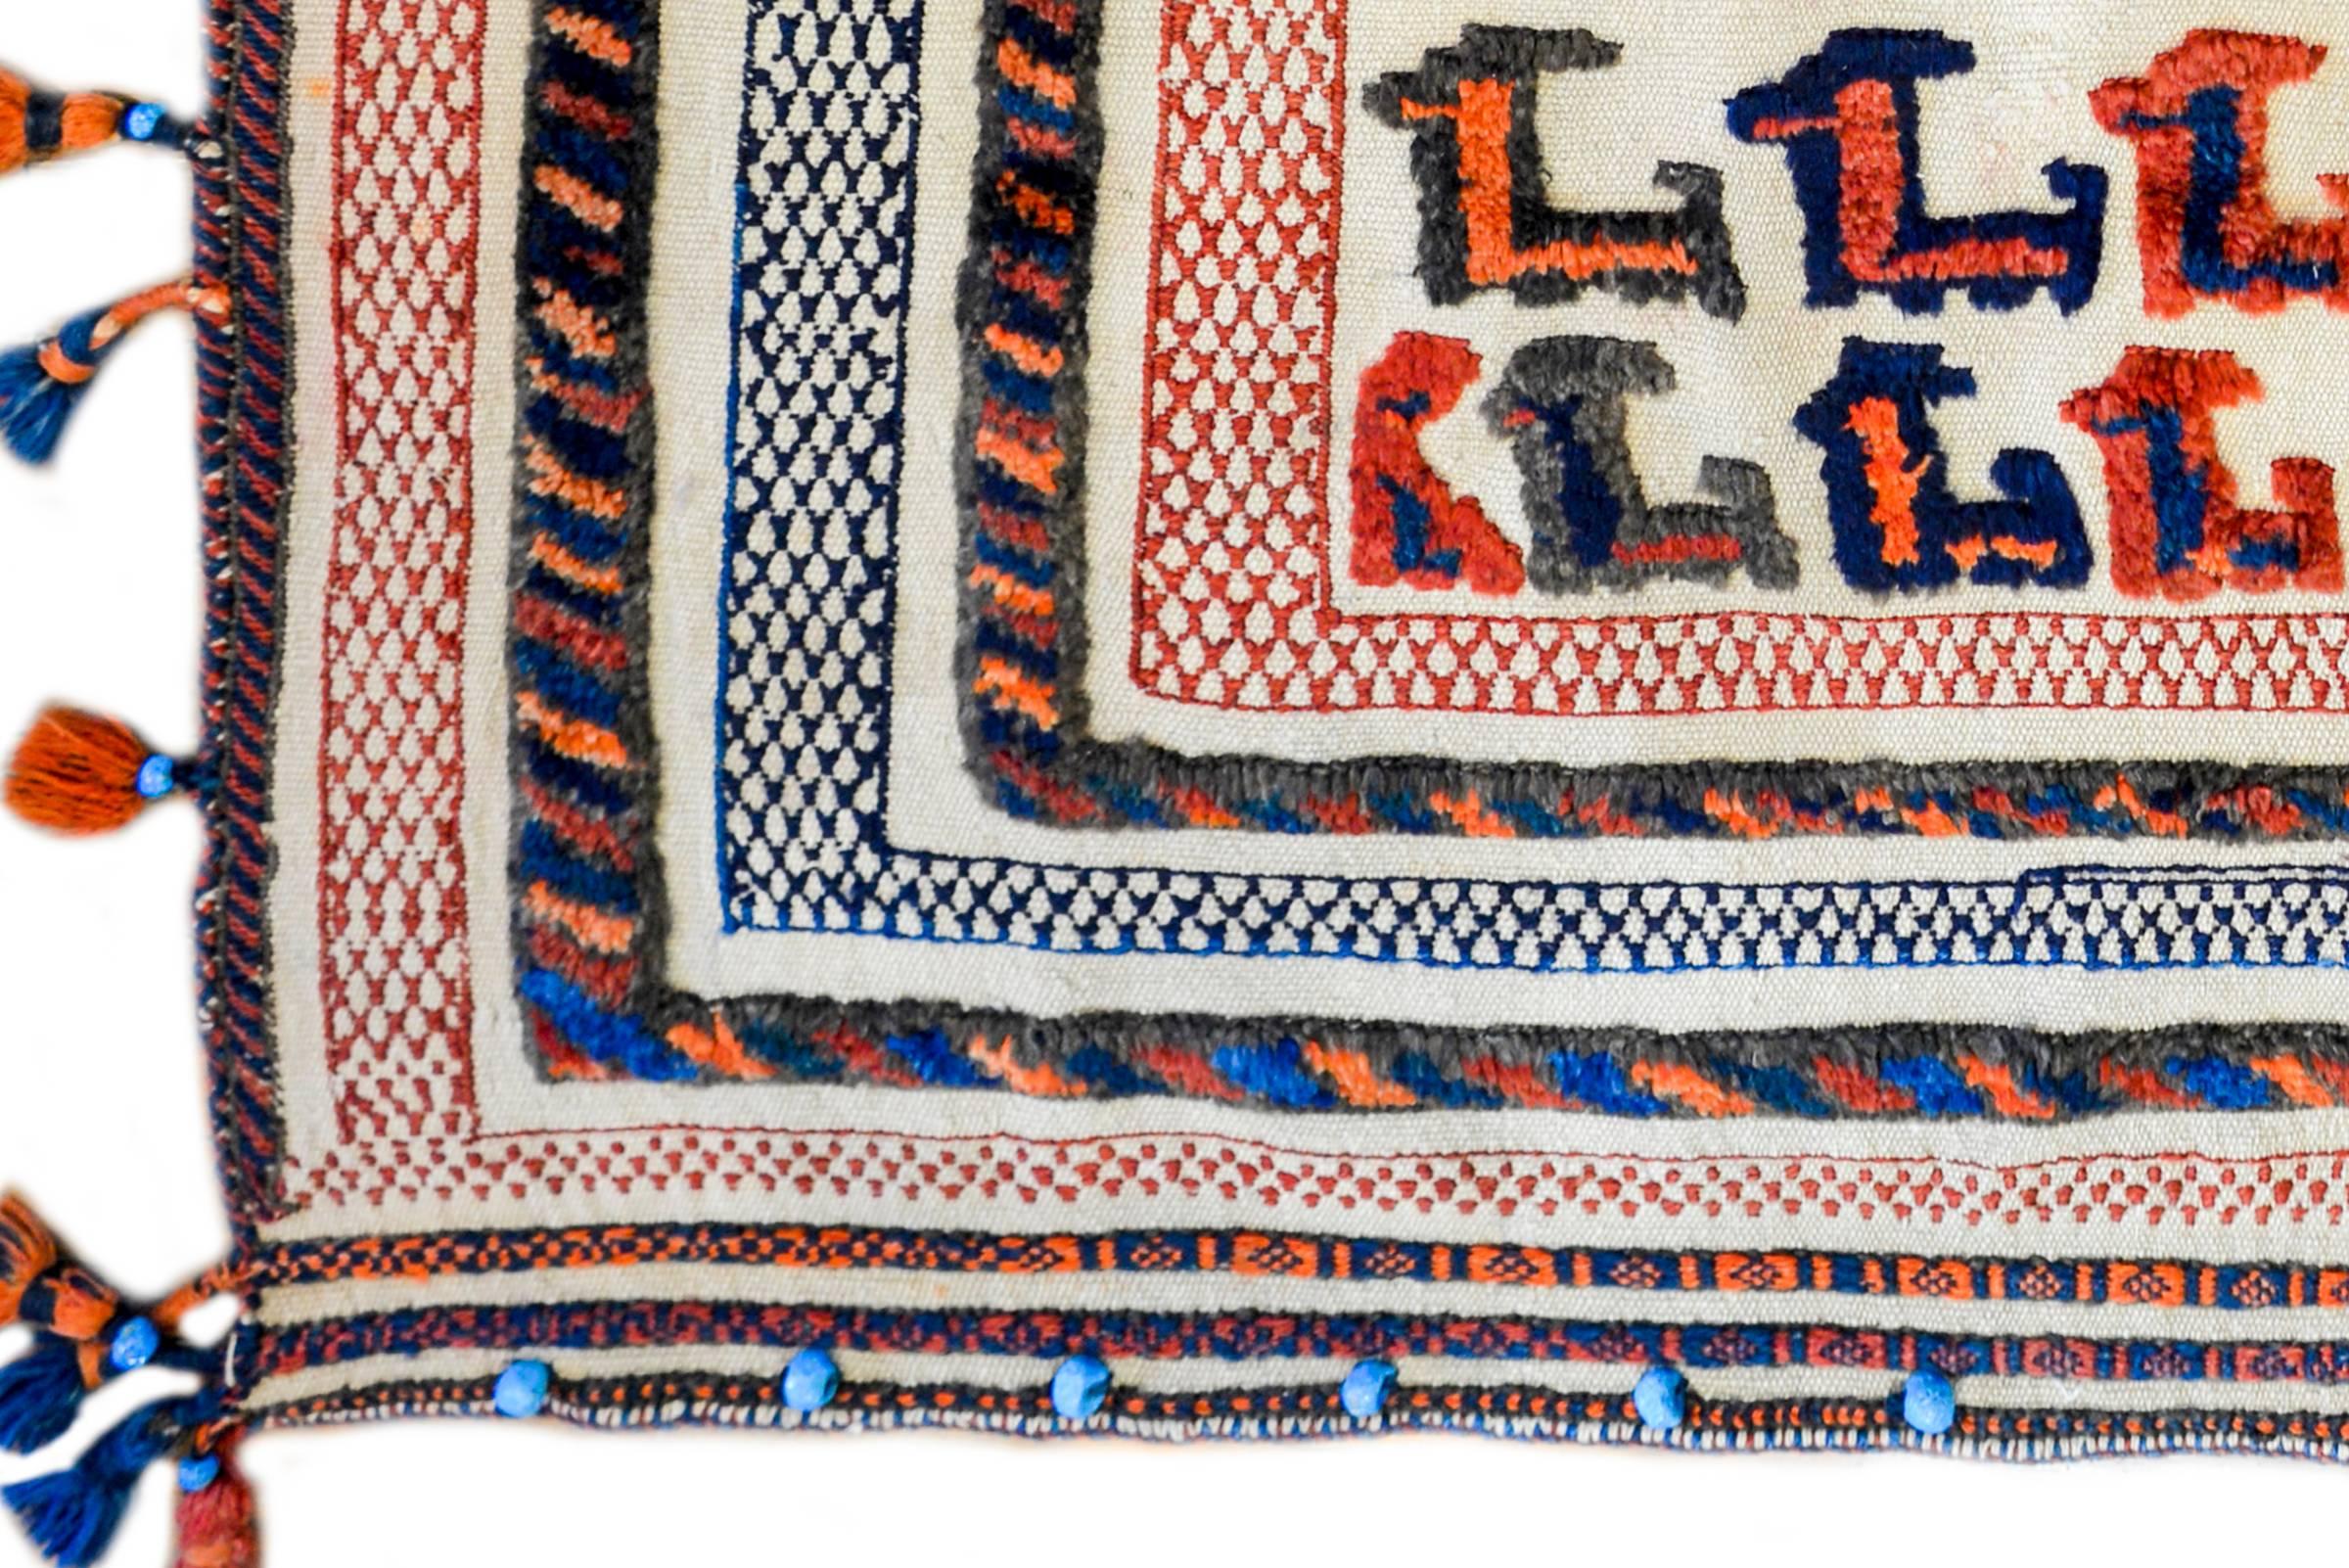 An amazing 20th century Persian Afshar horse blanket with a beautiful whimsical pattern of multicolored goats woven surrounded by a border of multiple pile and embroidered stripes, with tassels all around.